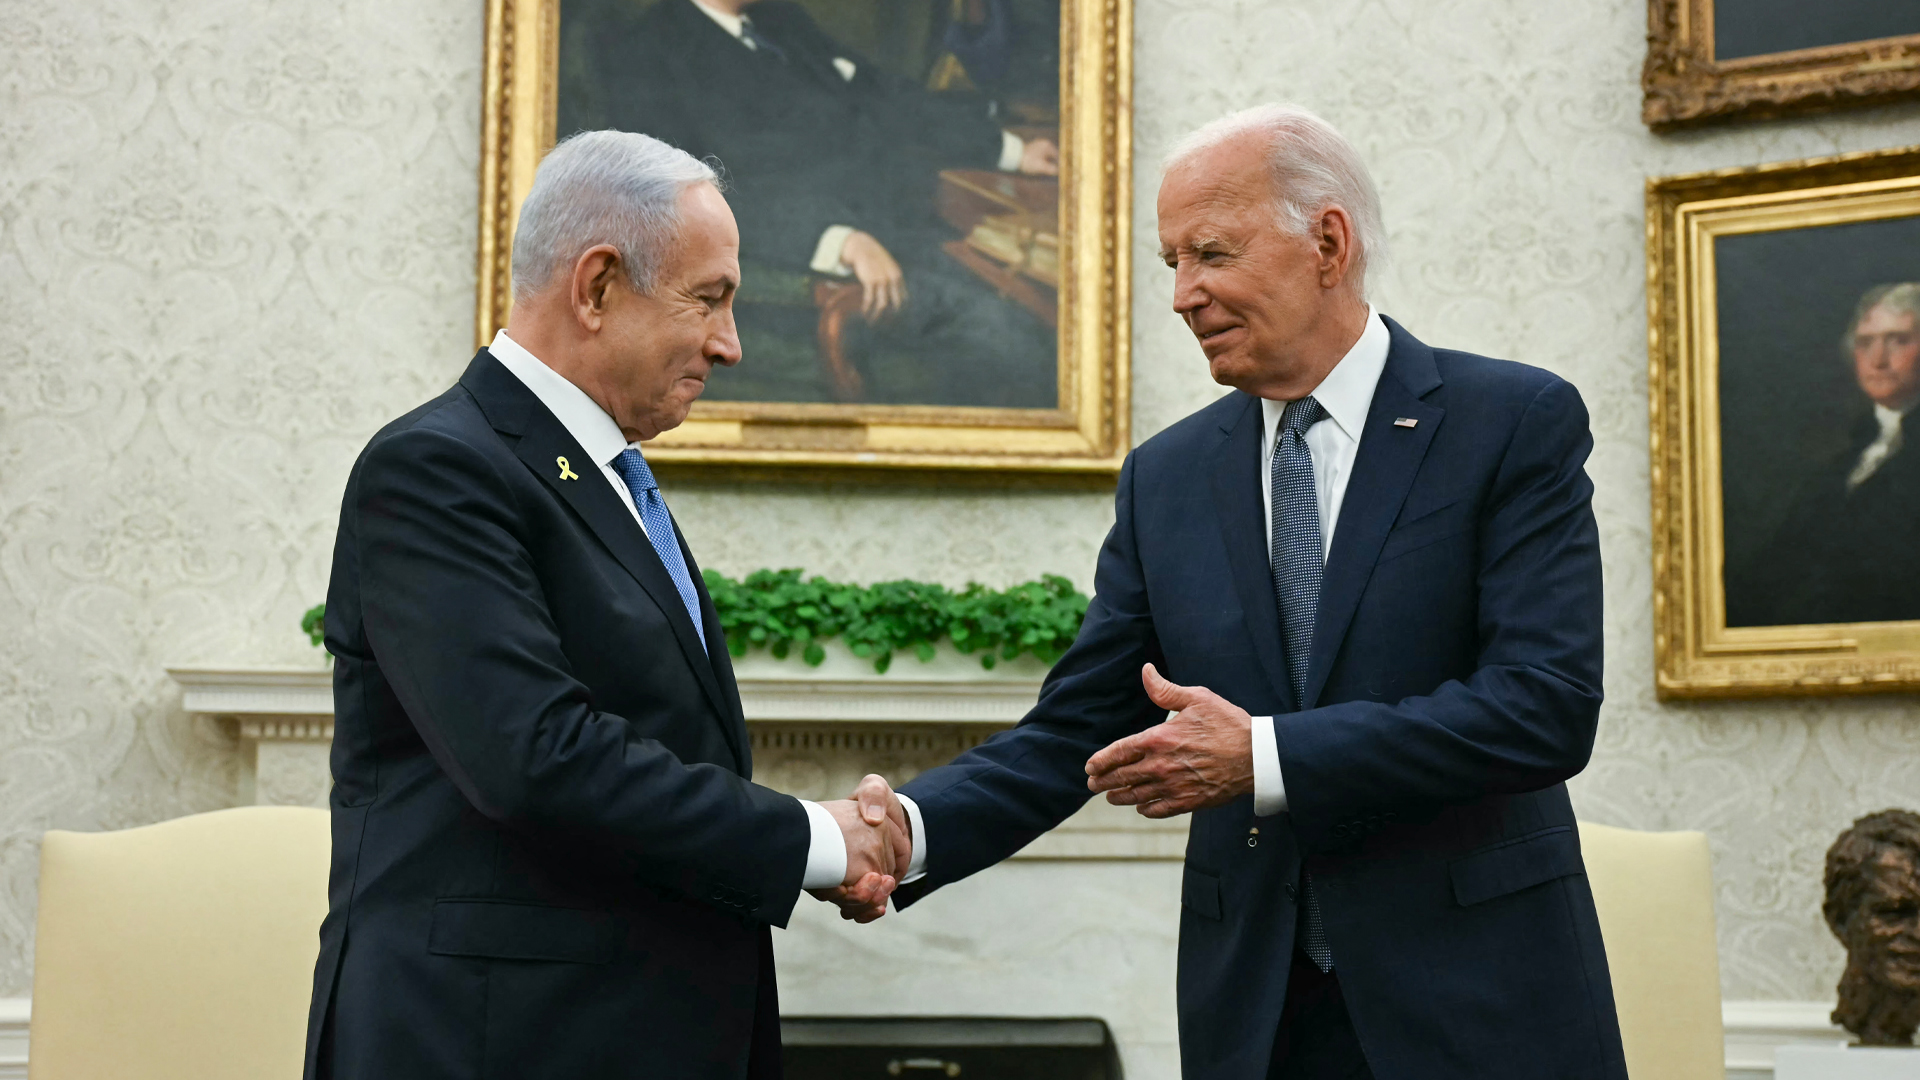 Biden & Netanyahu meet with hostage families a day after scorching Congress speech  as president pushes for Gaza truce [Video]